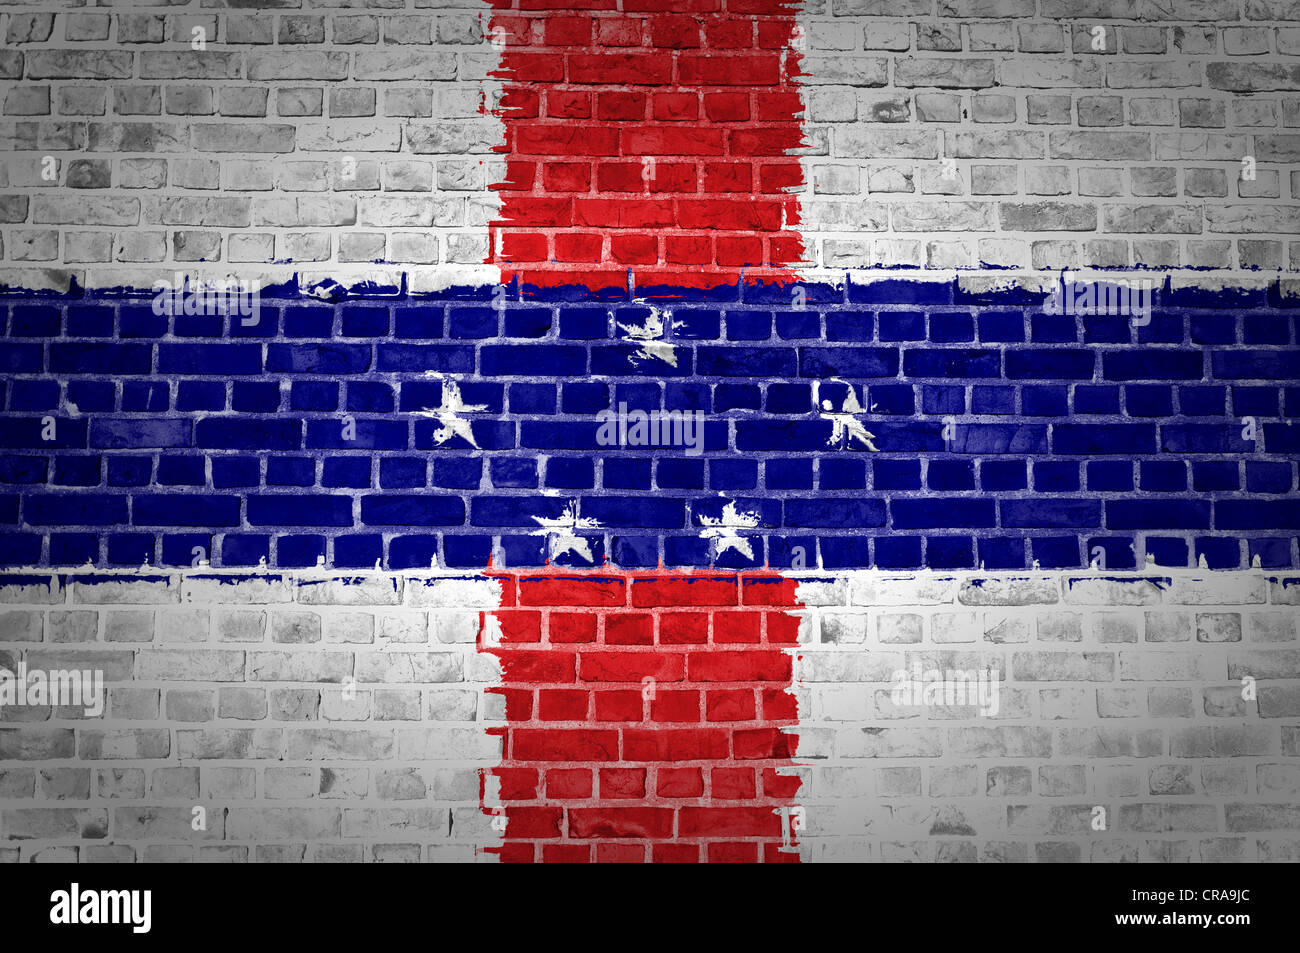 An image of the Netherlands Antilles flag painted on a brick wall in an urban location Stock Photo